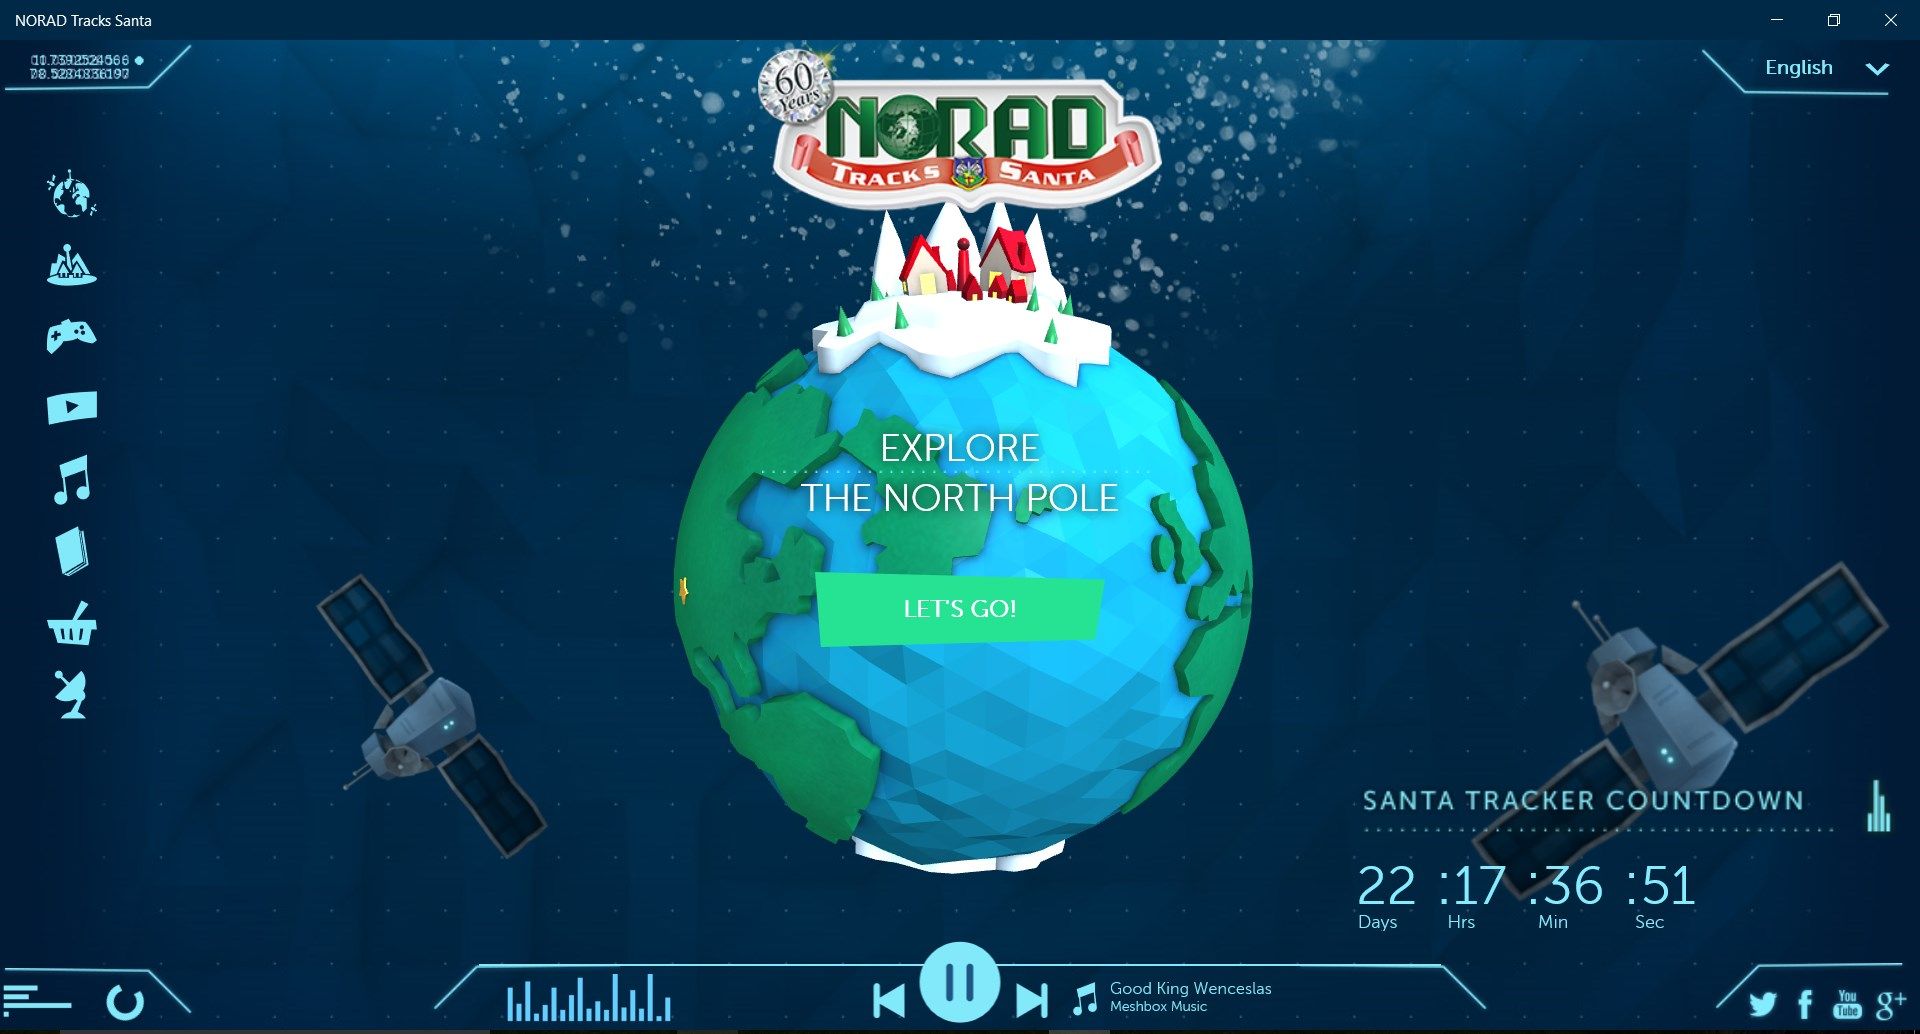 Santa's view of the world